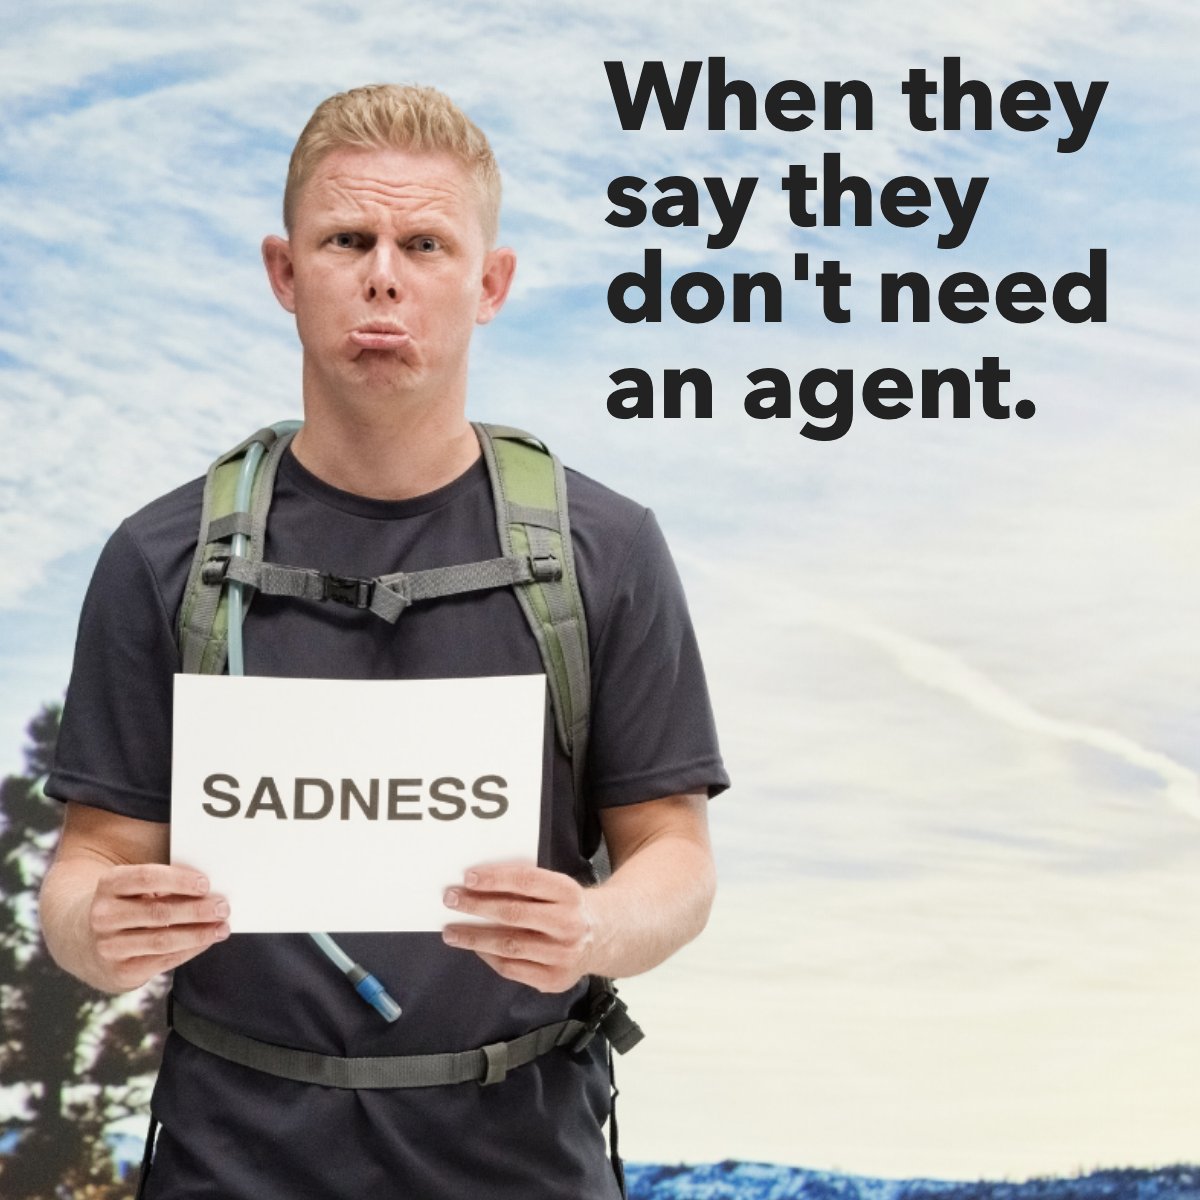 They hurt our feelings. 💔🥺

#sadness #realestatehumor #realestatejokes #realestateagent #theydoneedus